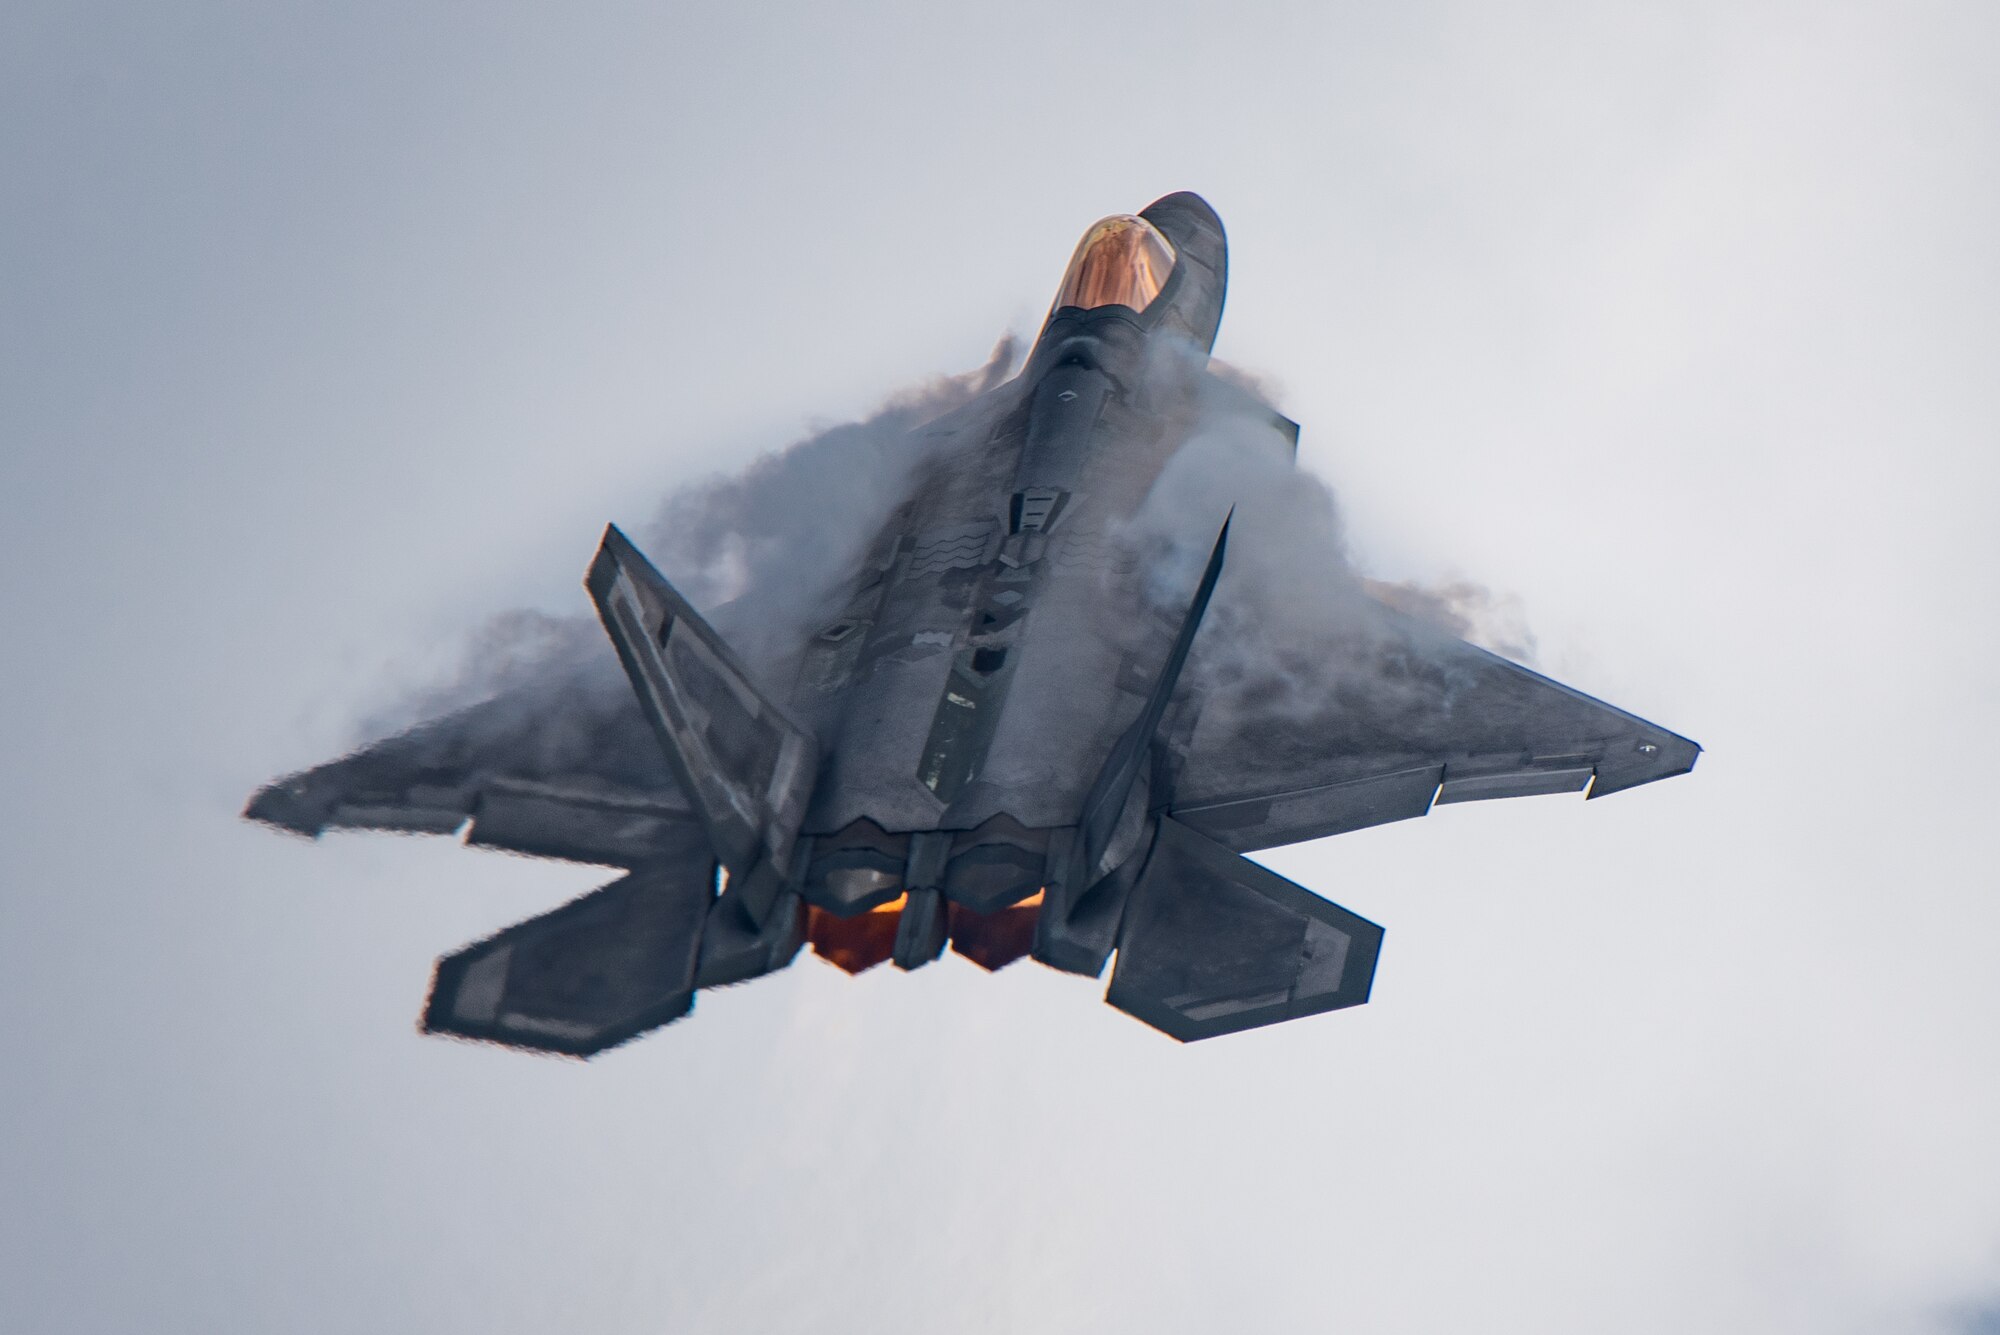 F-22 Raptor Demonstration Team commander, performs during the Chicago Air and Water Show